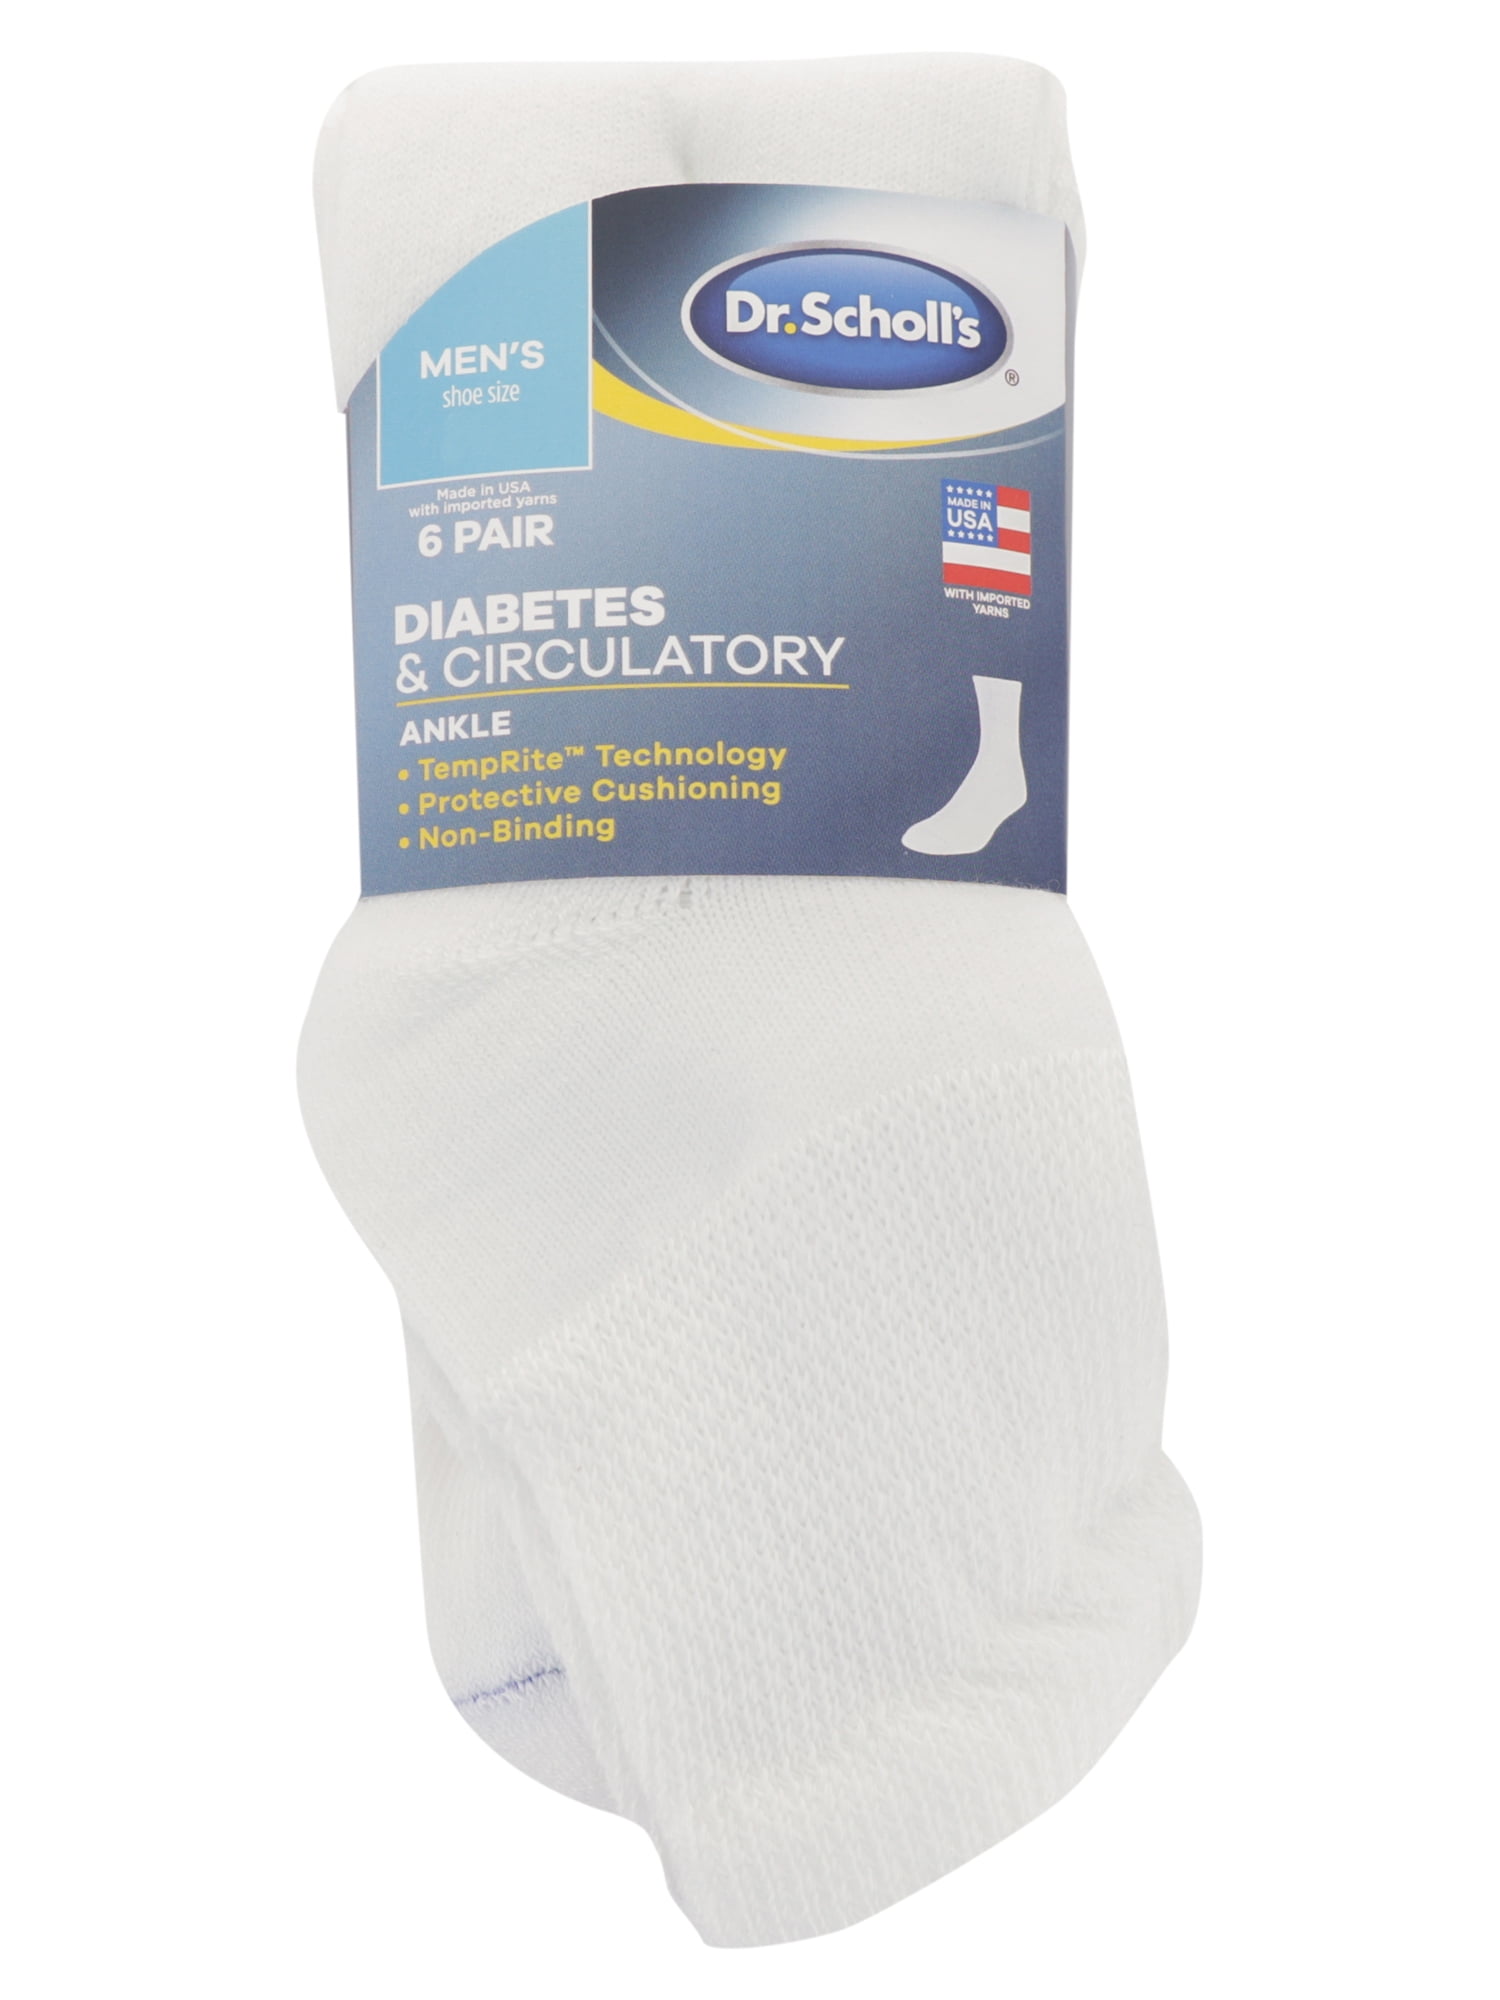 Dr Scholl's Men's Diabetic Ankle Socks 2-Pack " BIG & TALL" MADE IN USA NEW! 